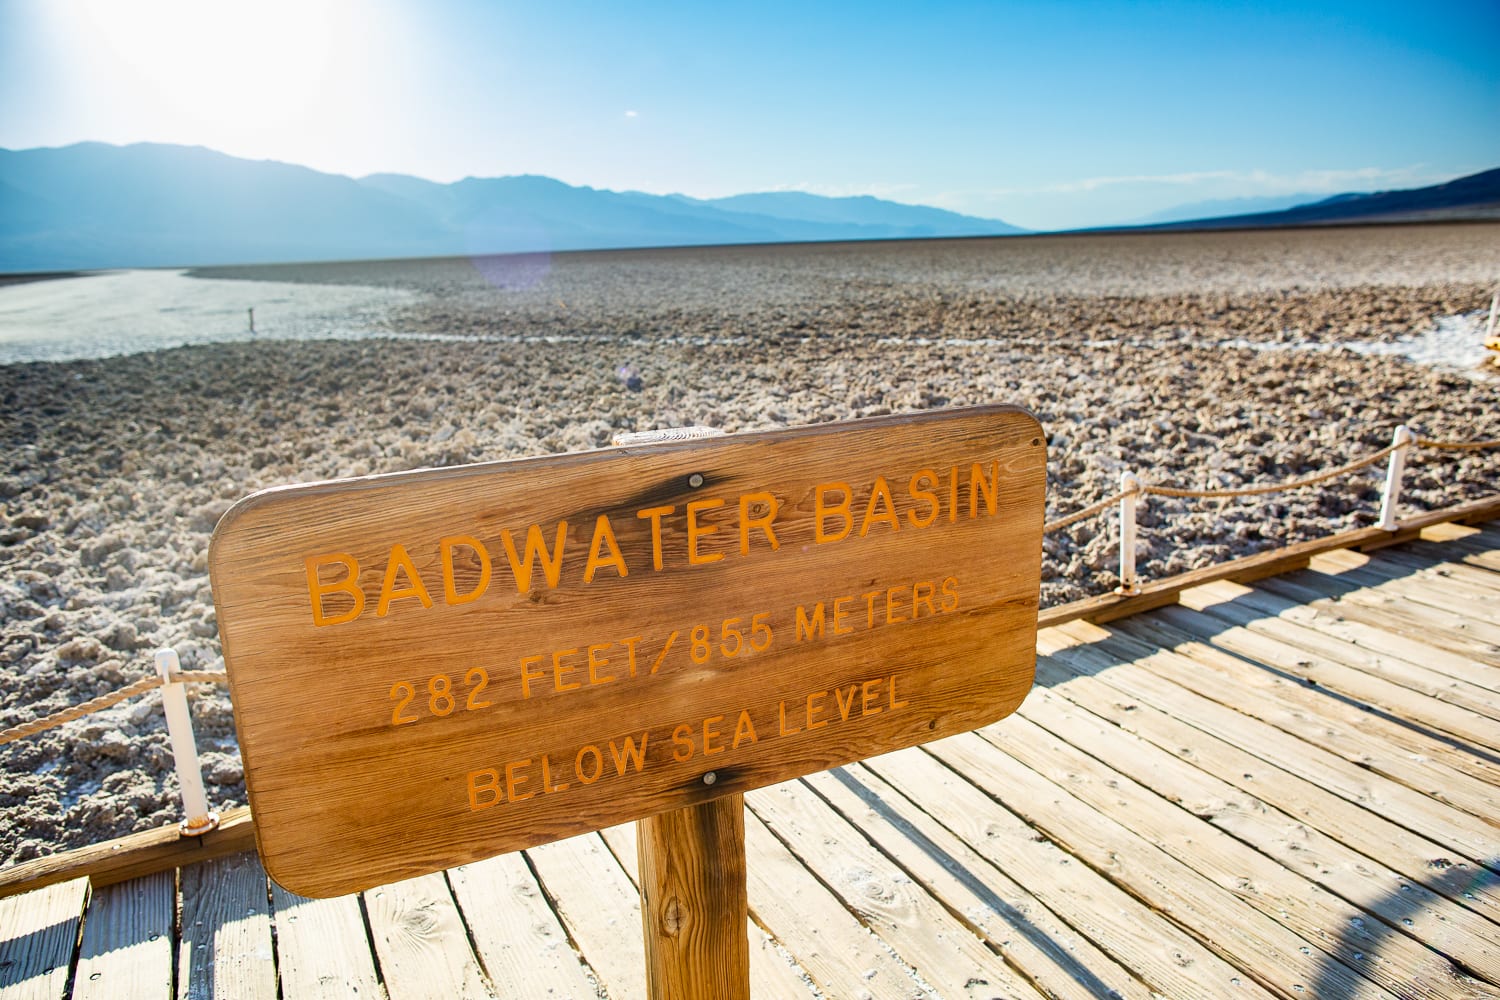 A wooden sign at badwater basin salt flats shows the elevation.